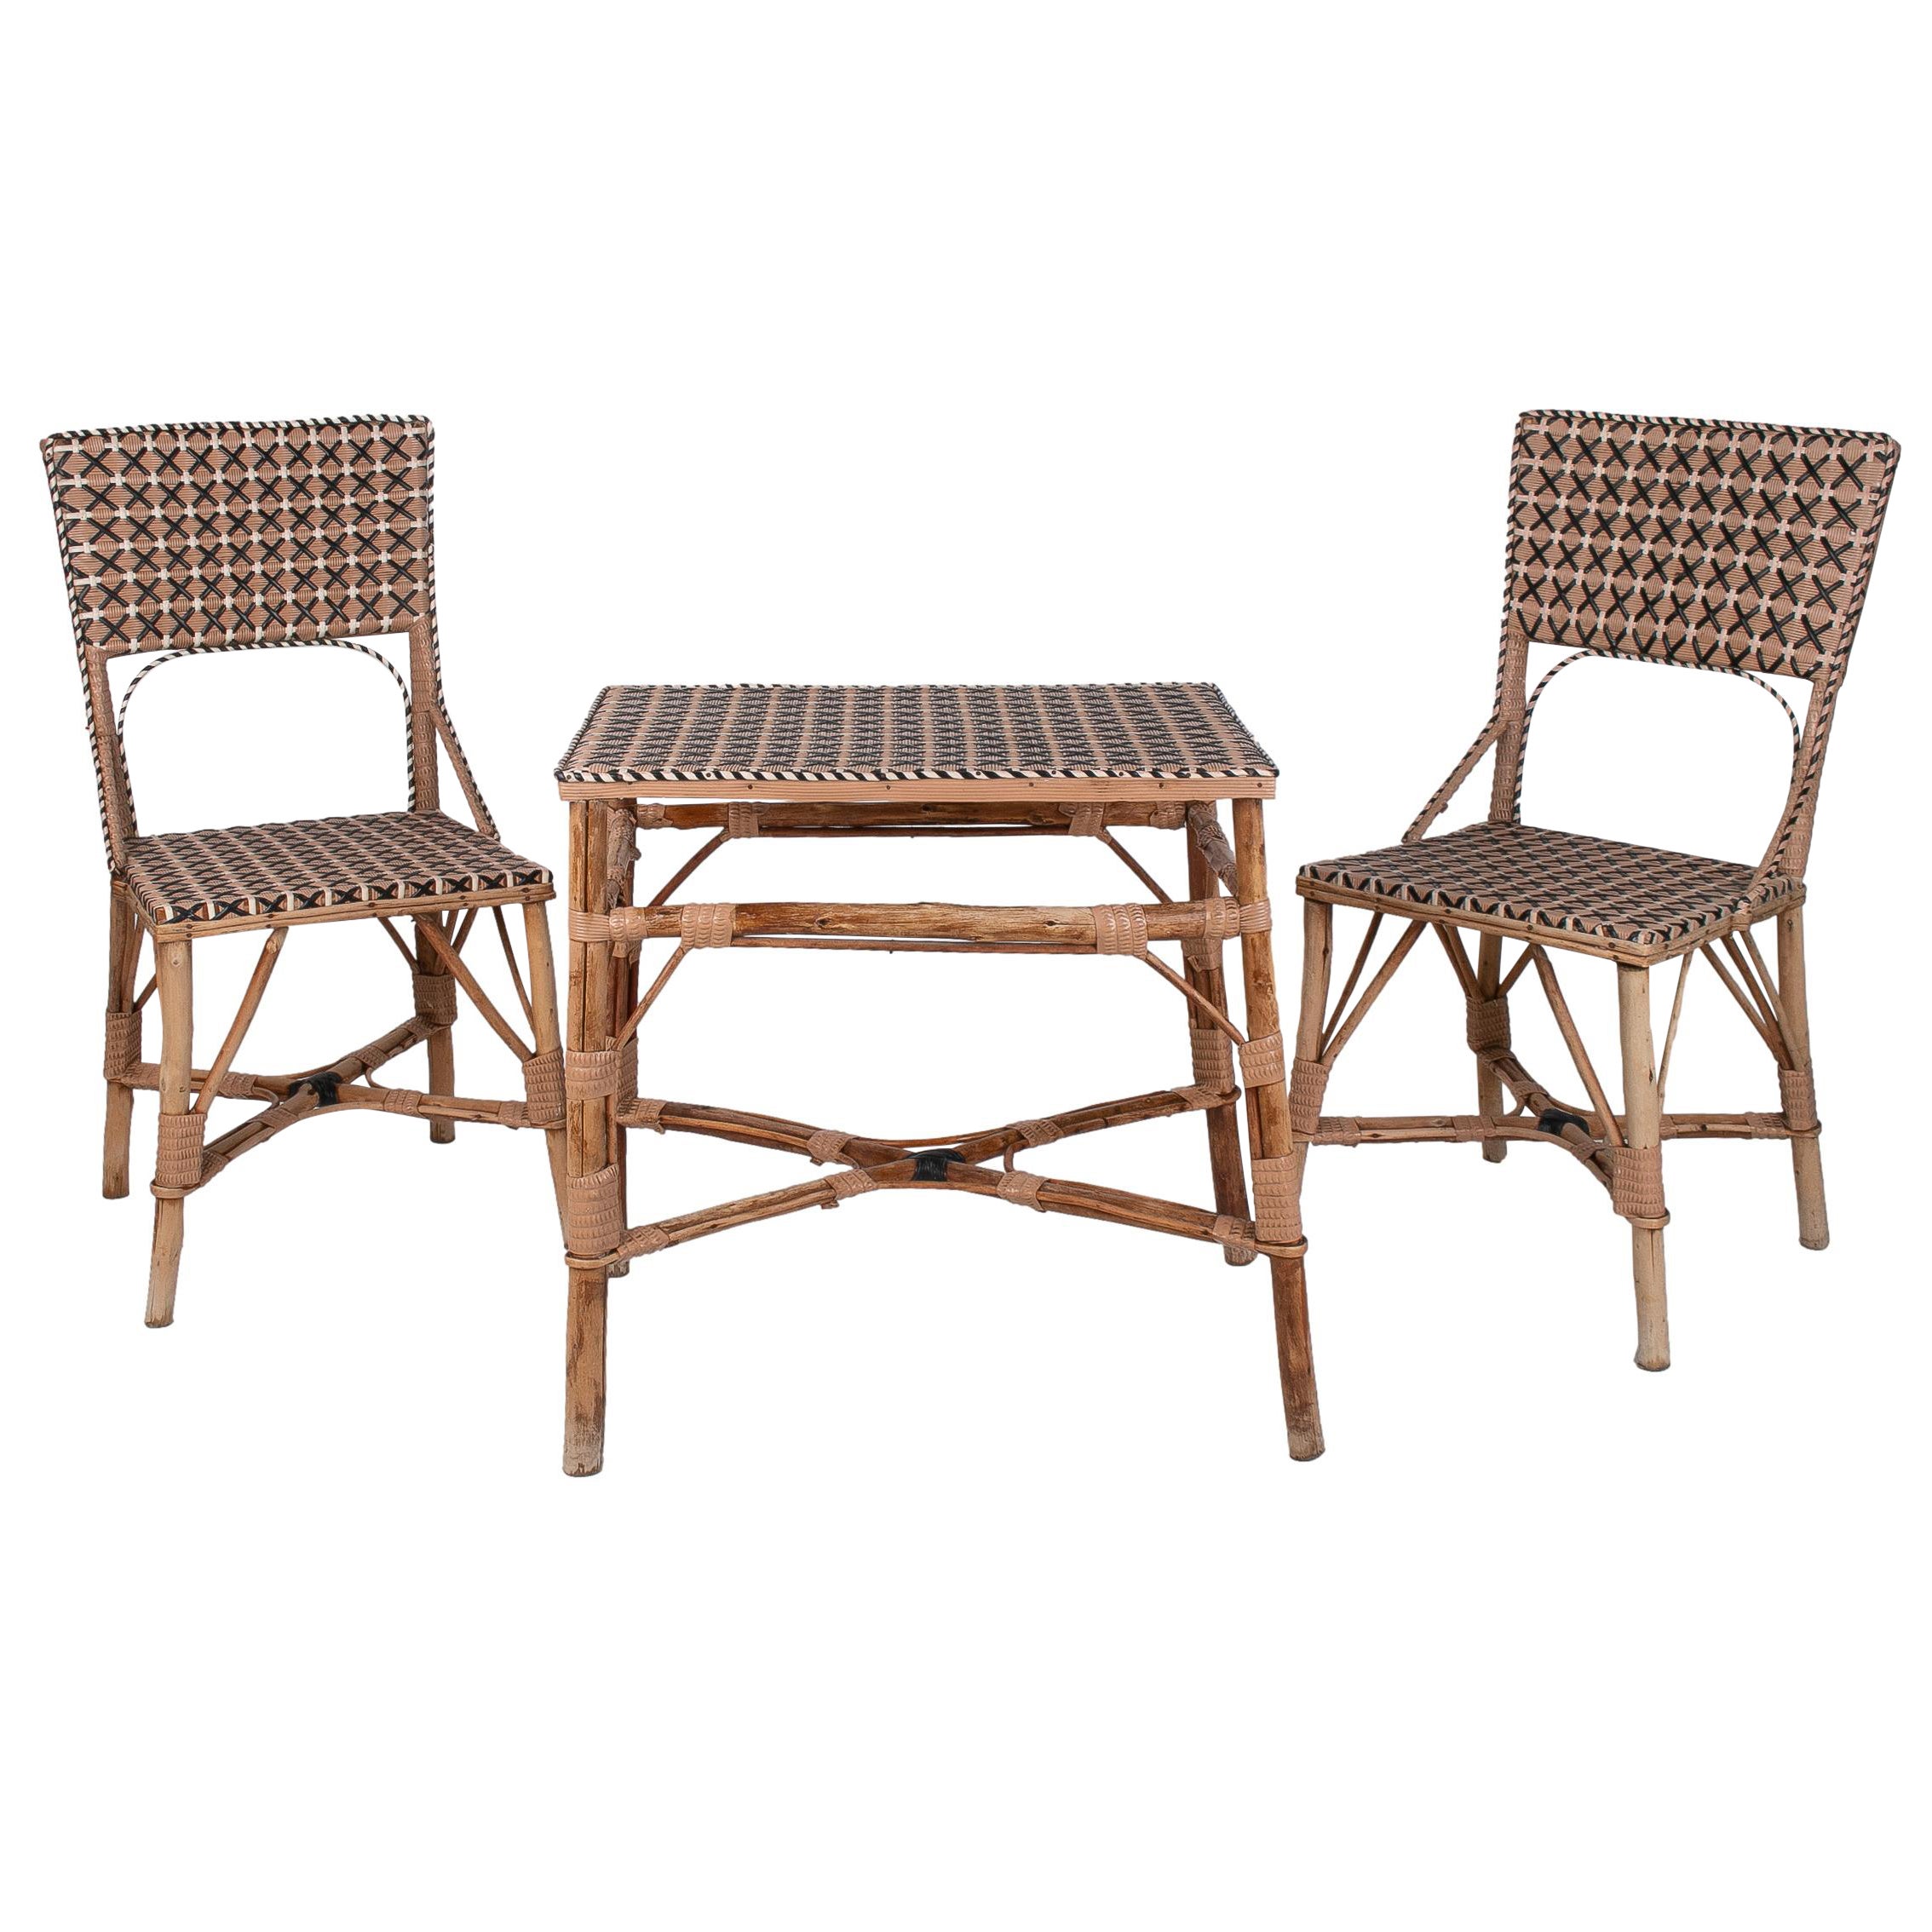 1950s Spanish Woven Wicker on Wood Set of 2-Chairs w/ Table